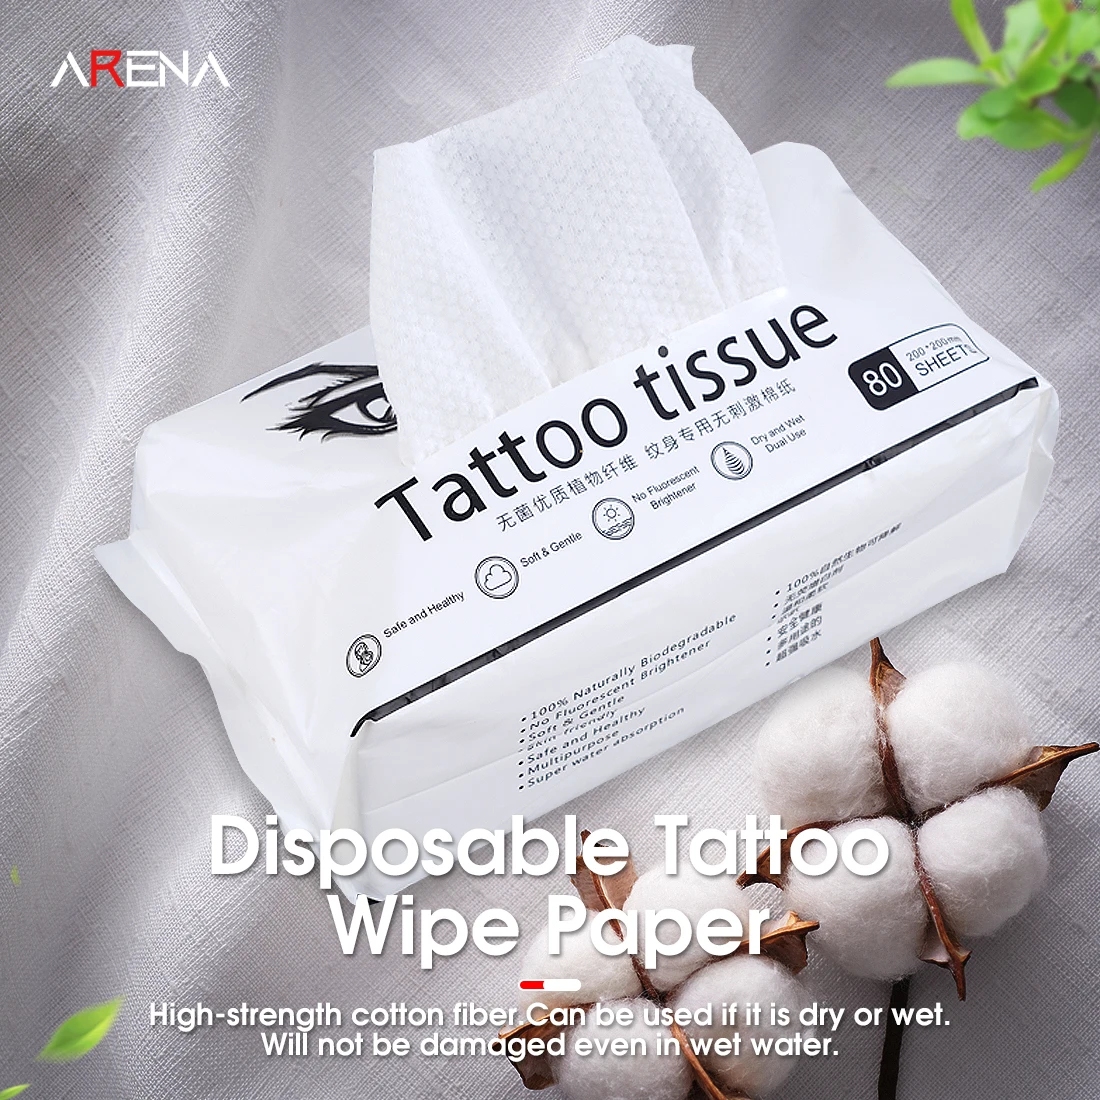 80pcs Arenahawk White Disposable Tattoo Wipe Paper Soft Tissue Skin Cloth Towel Body Art Cleaning Makeup Tattoo Supplies glasses anti fog wipe pre moistened phone cleaning wipes screen cleaning cloth disposable lens cleaning paper glasses wet towels